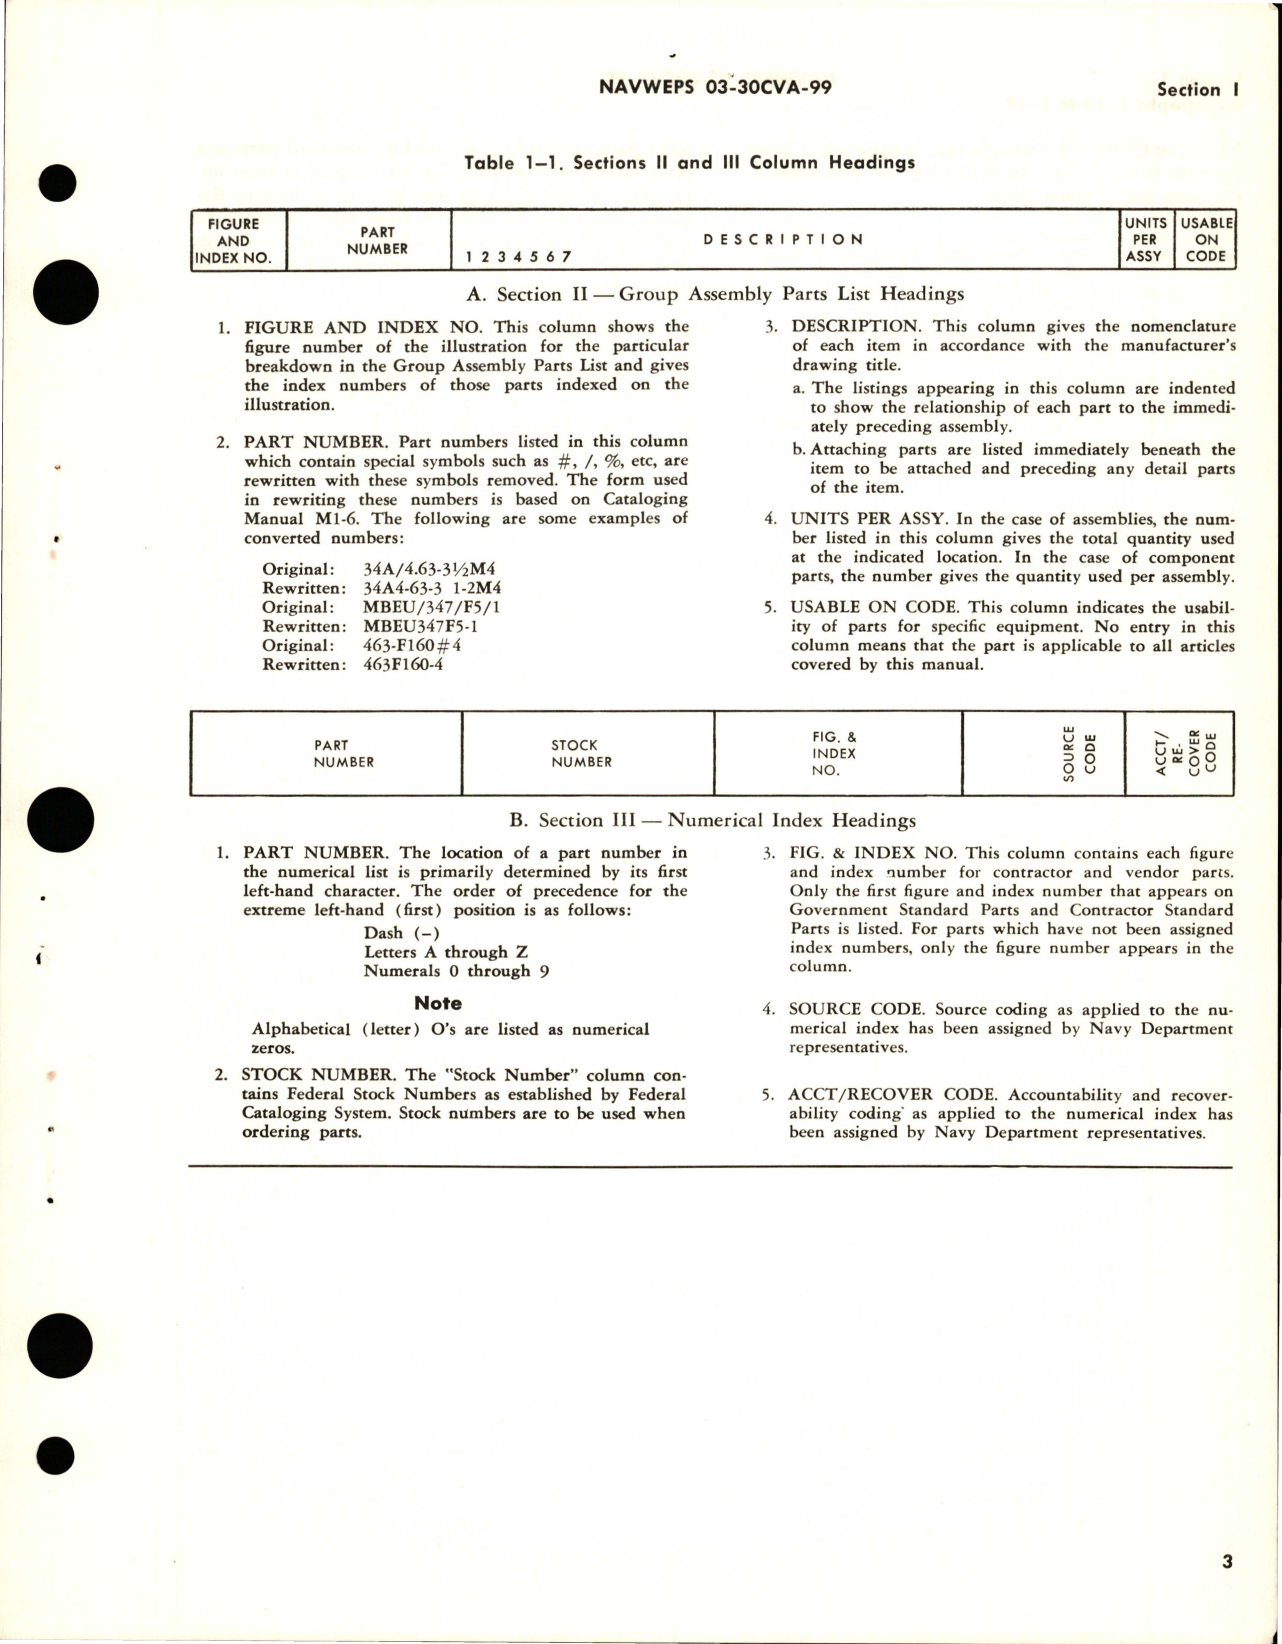 Sample page 5 from AirCorps Library document: Illustrated Parts Breakdown for Arresting Gear Assembly - Part CV15-664002-12